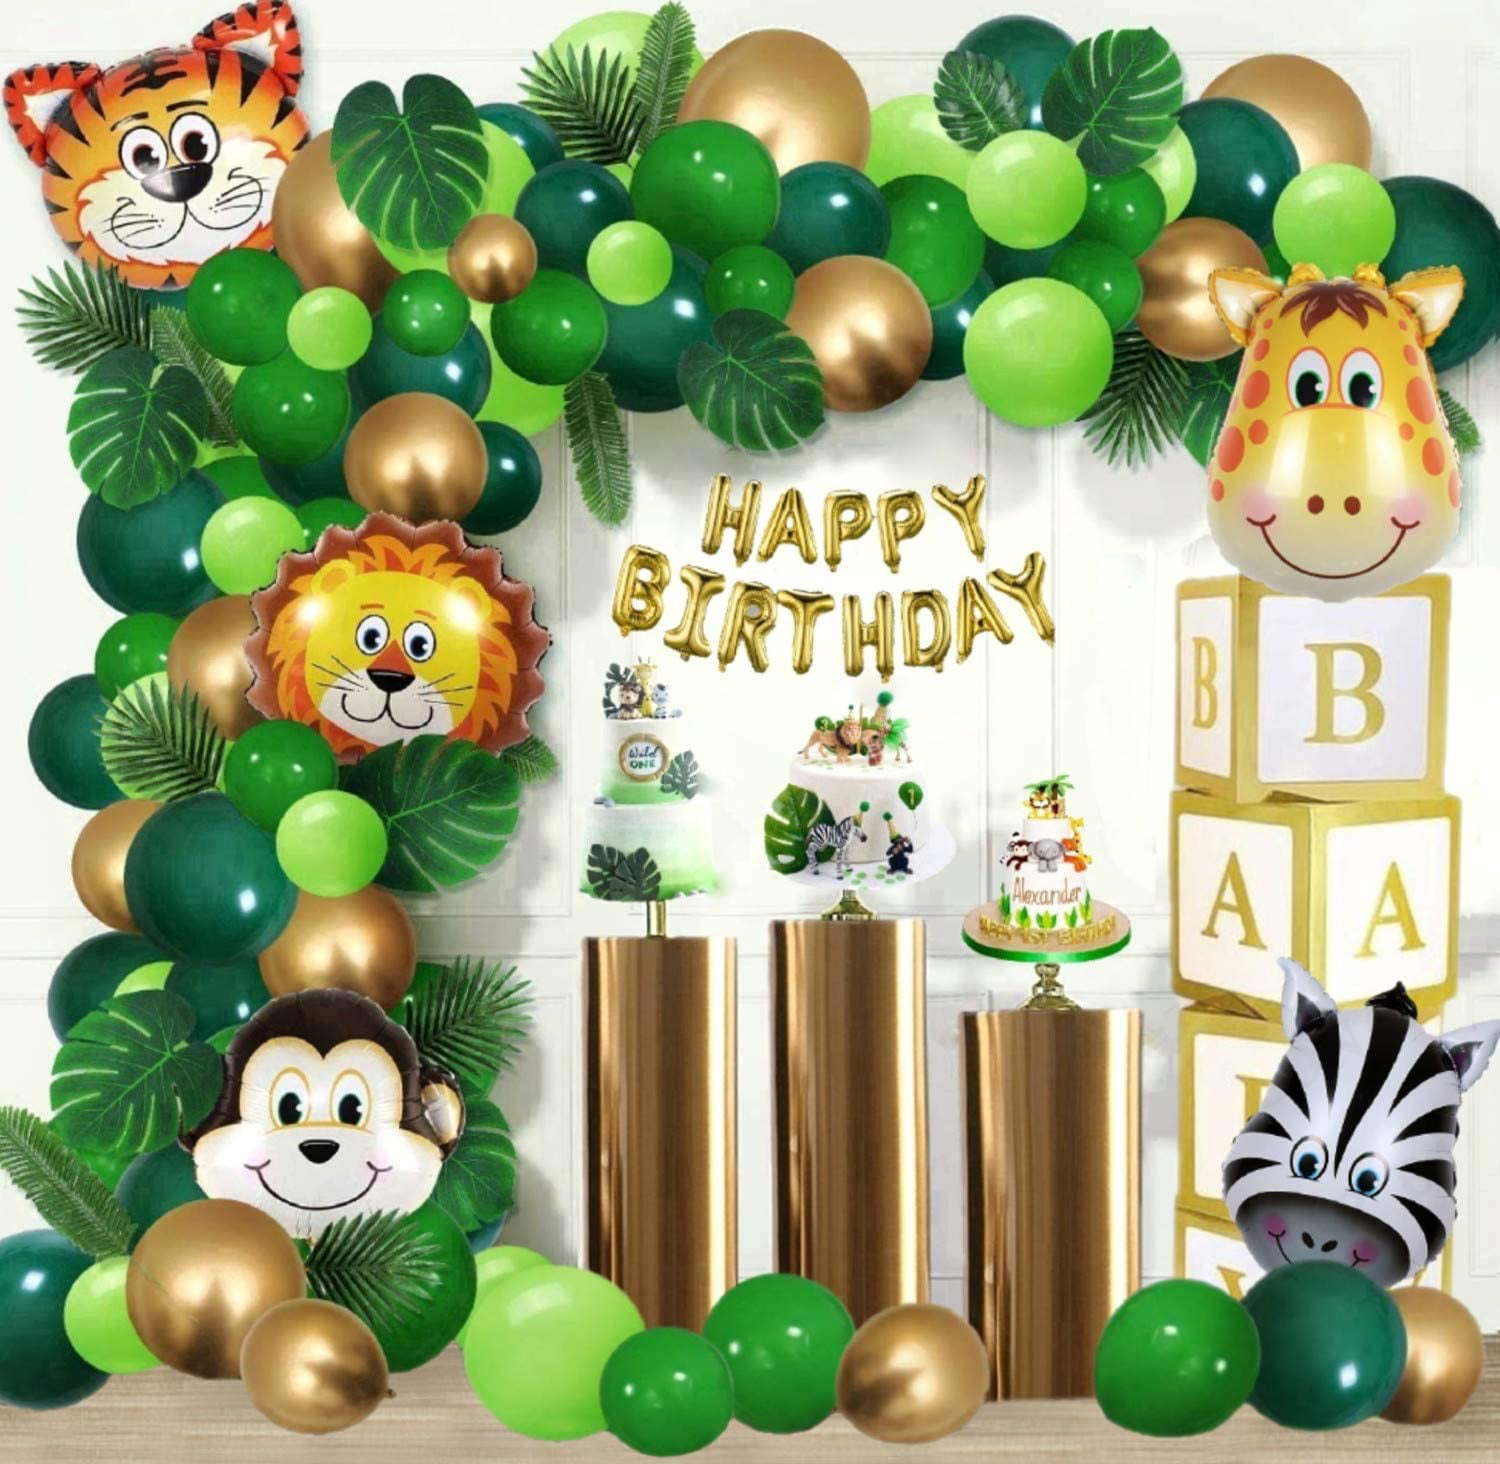 Party Supplies Balloons Tableware Theme Jungle Safari Party Decorations 